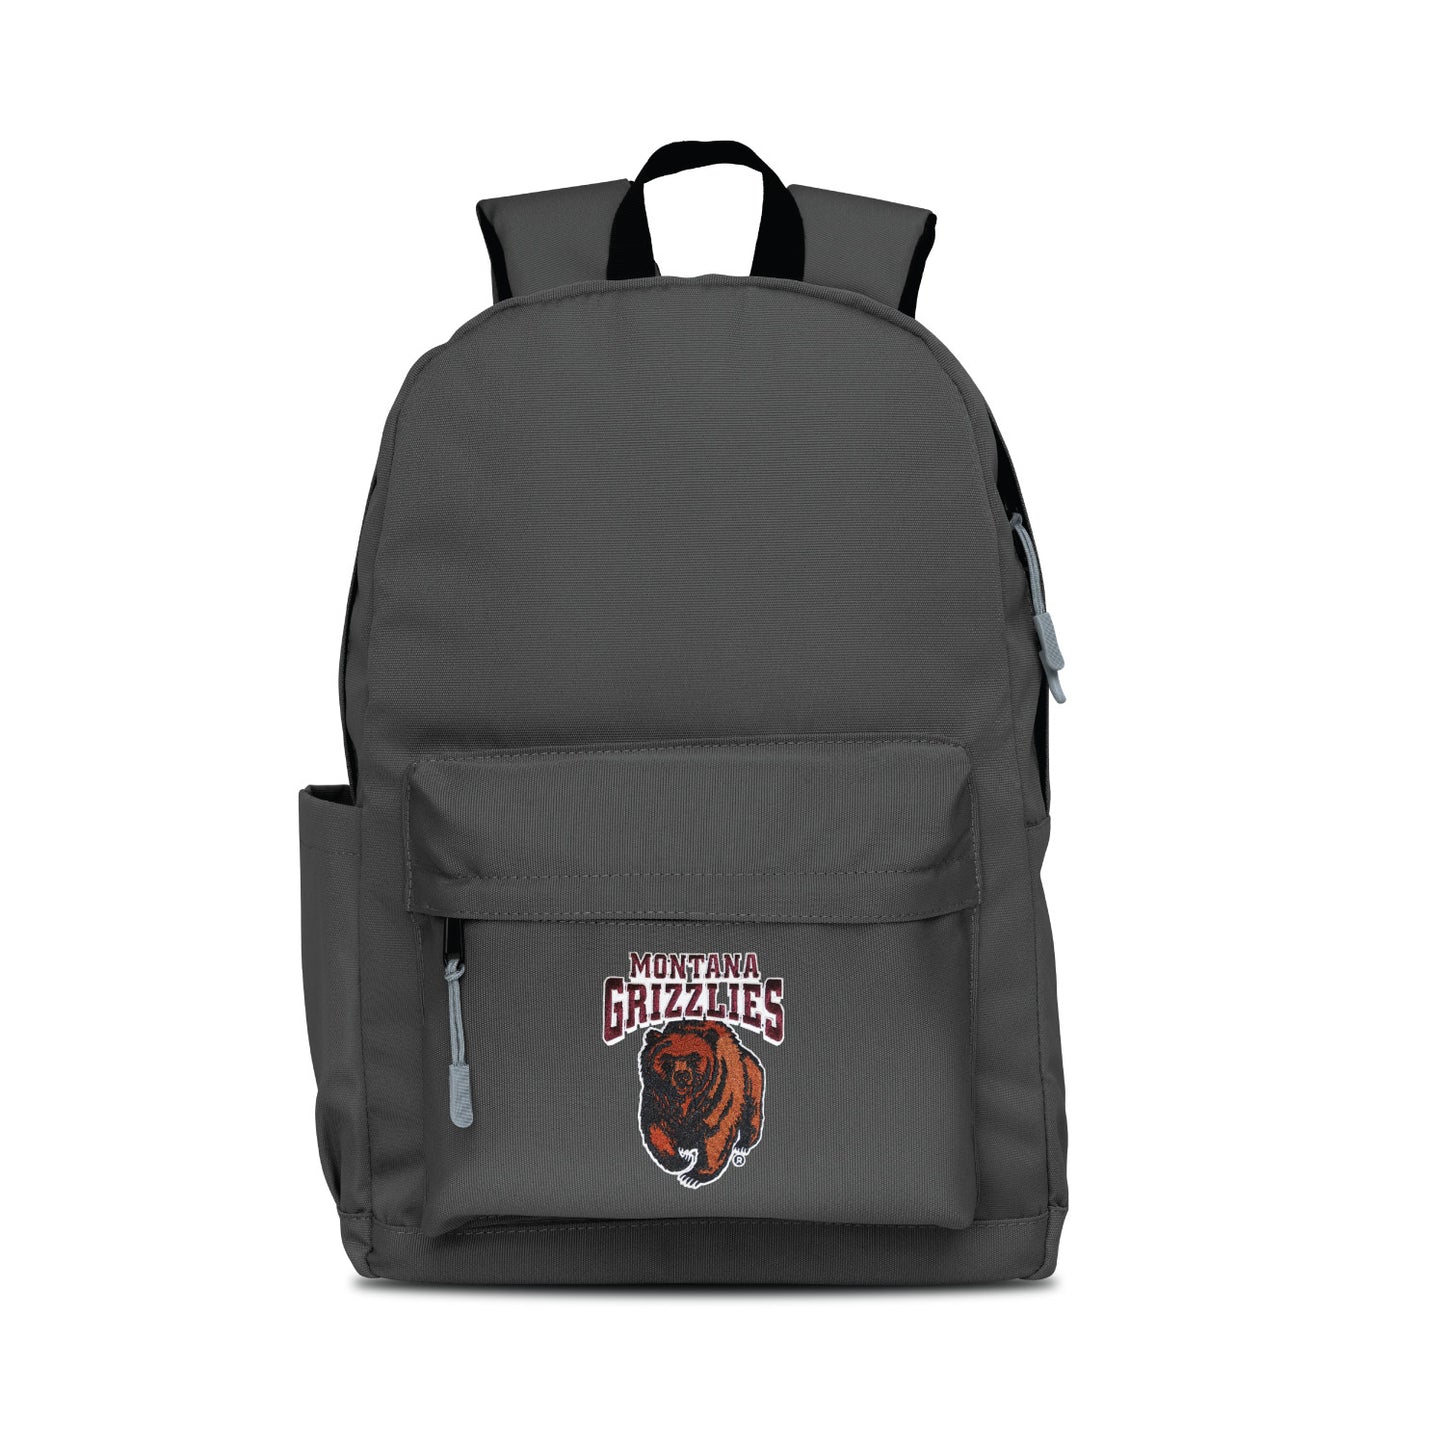 Montana Grizzlies Campus Laptop Backpack- Gray